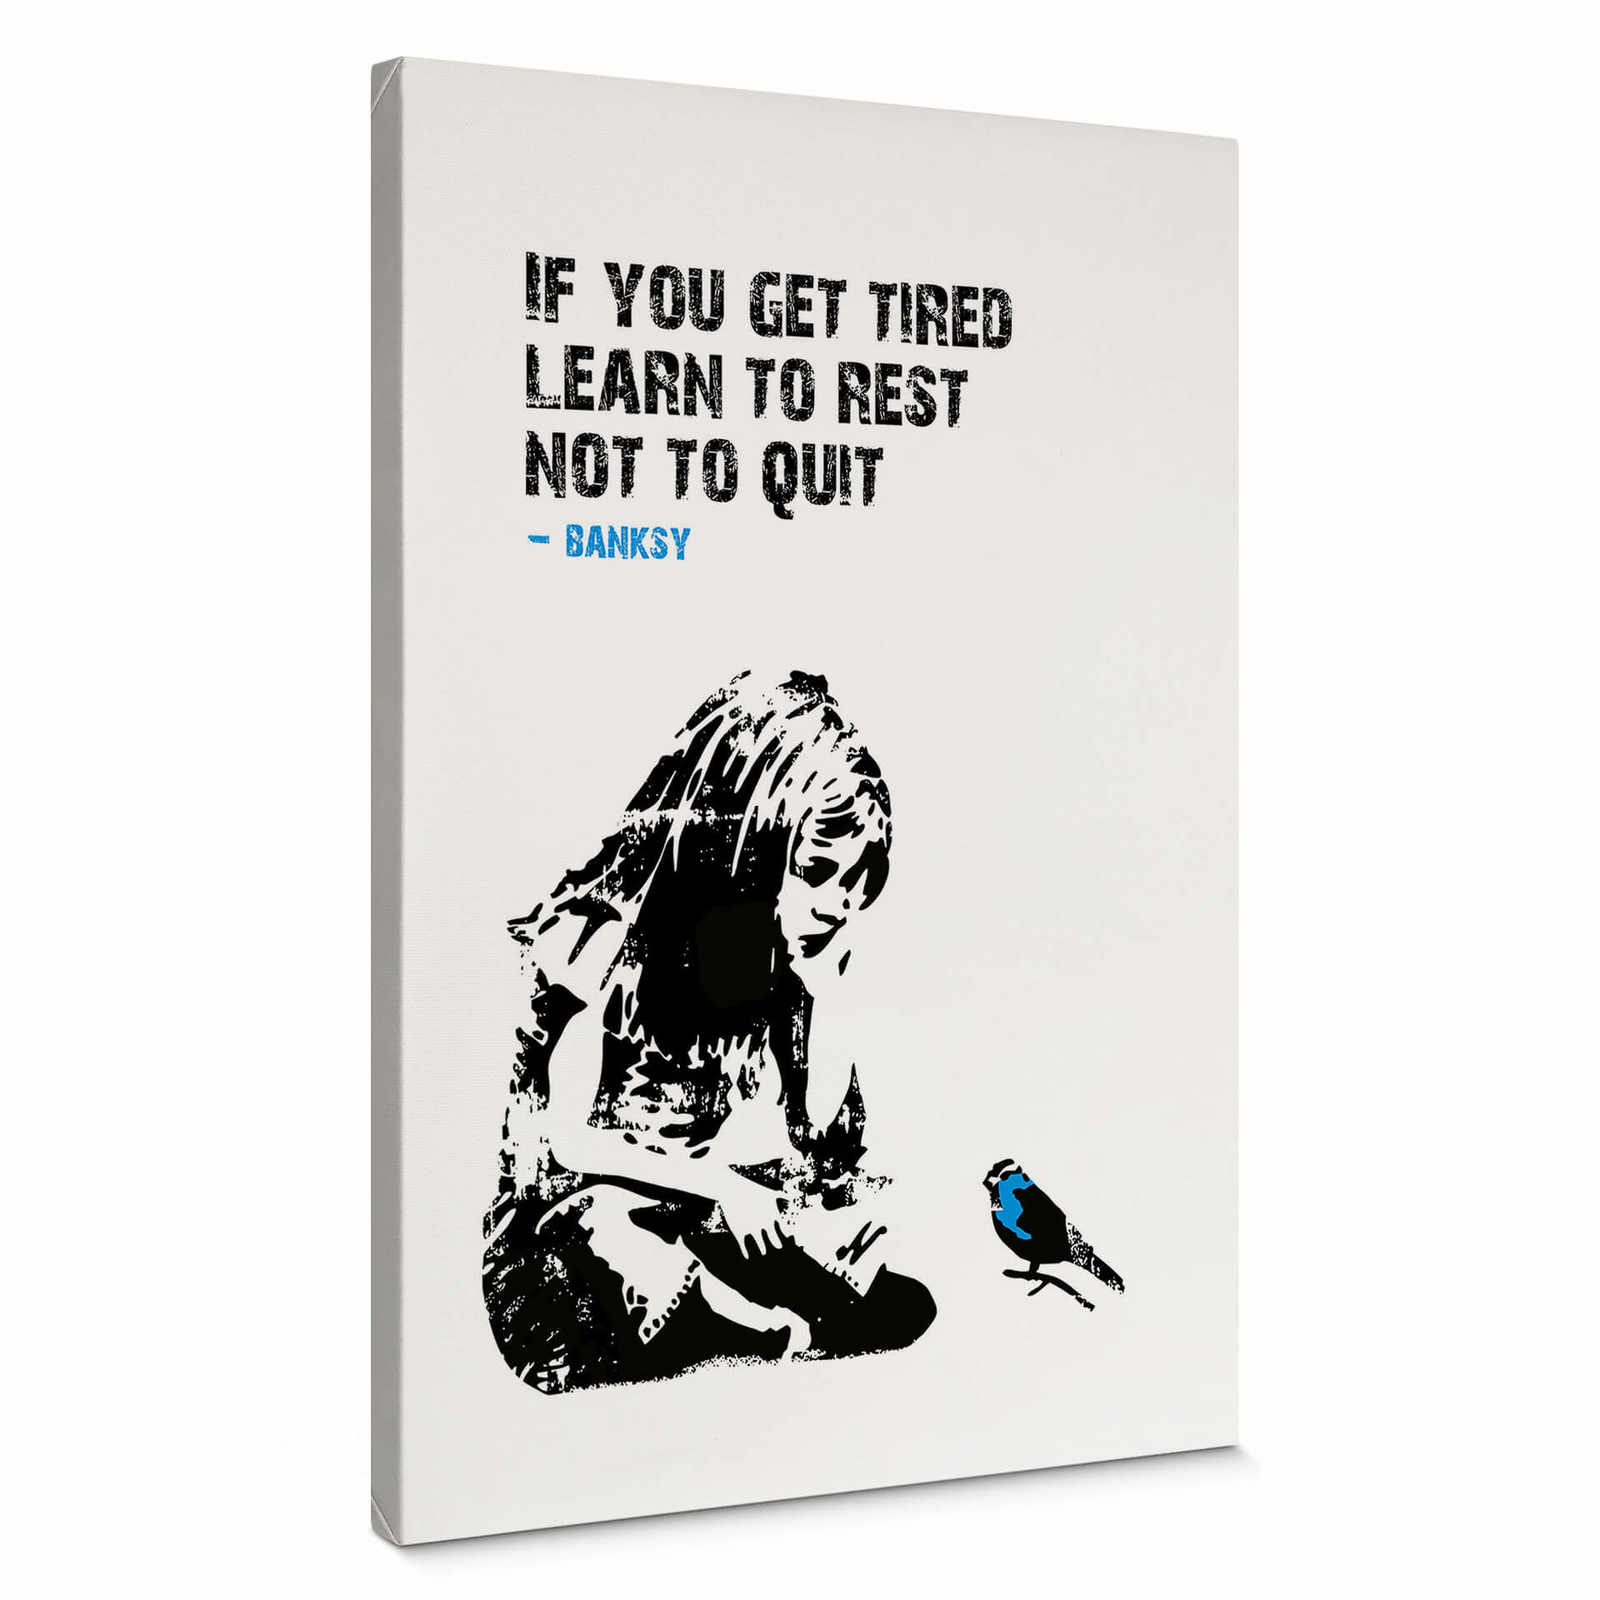         Canvas print "If you get tired" by Banksy – black and white
    